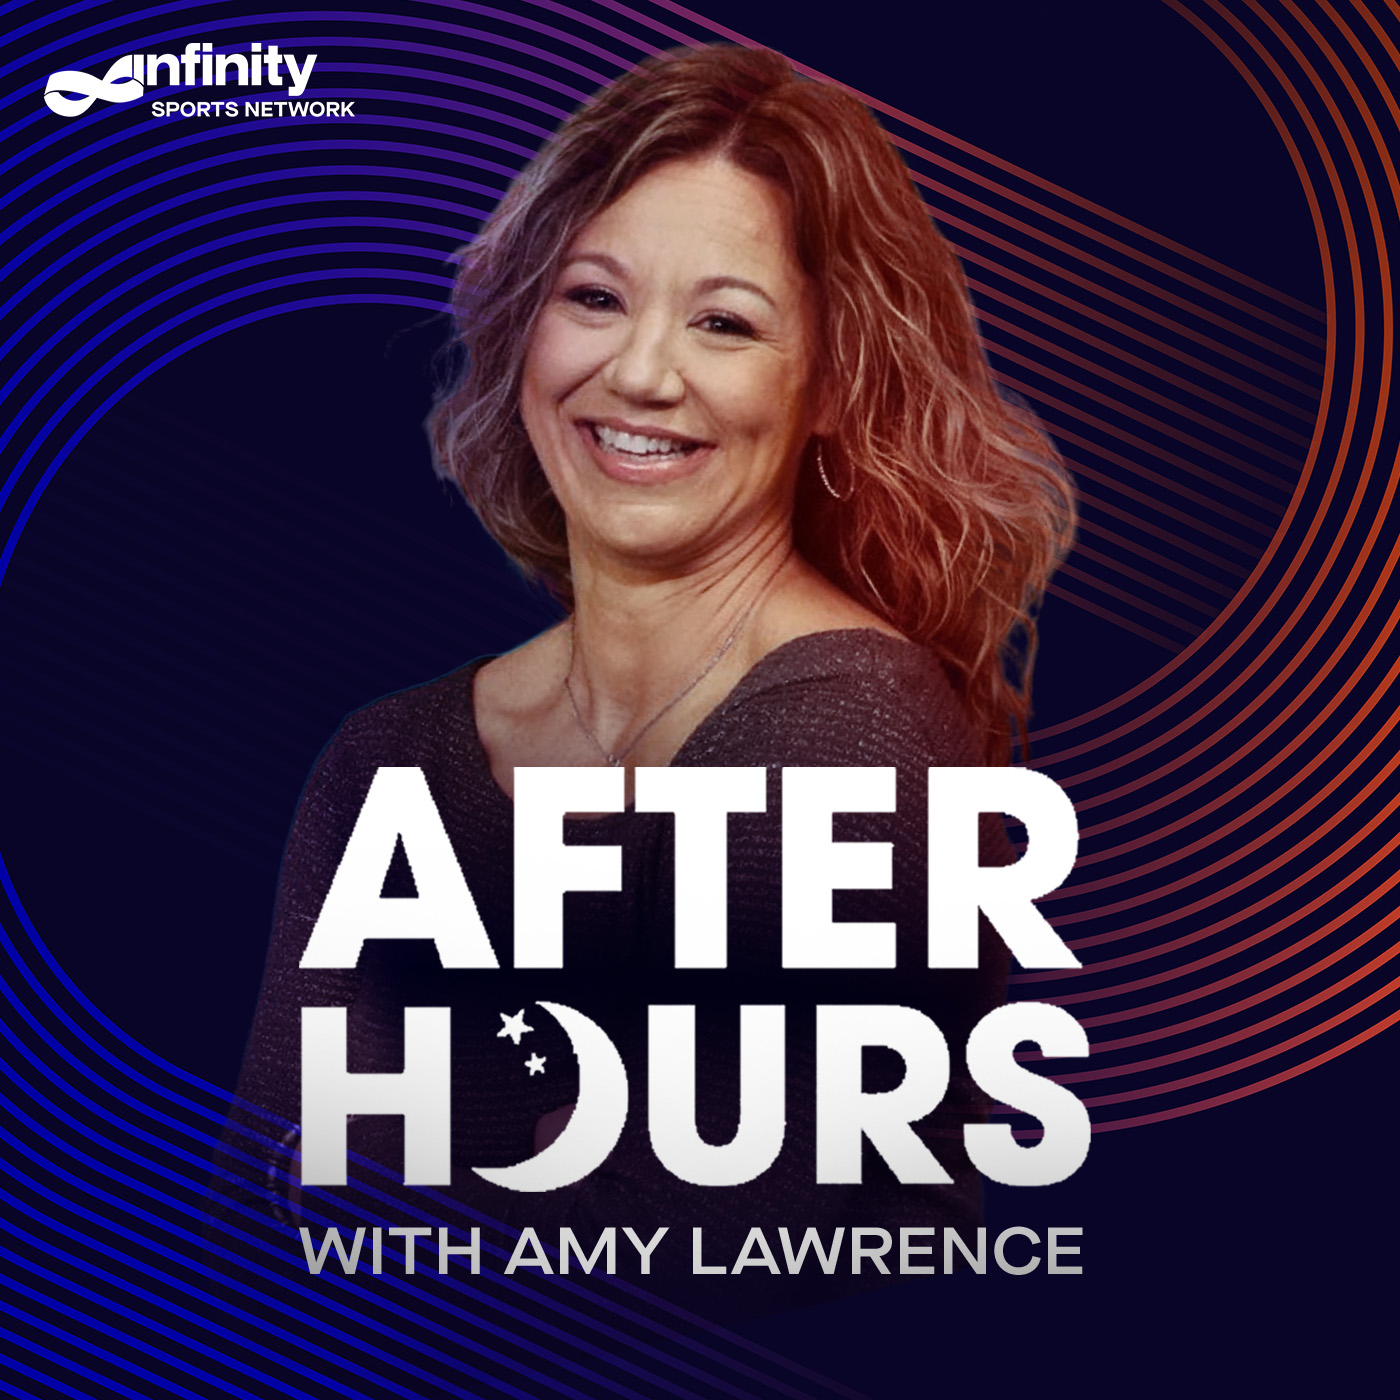 1-27-22 After Hours with Amy Lawrence PODCAST: Hour 4